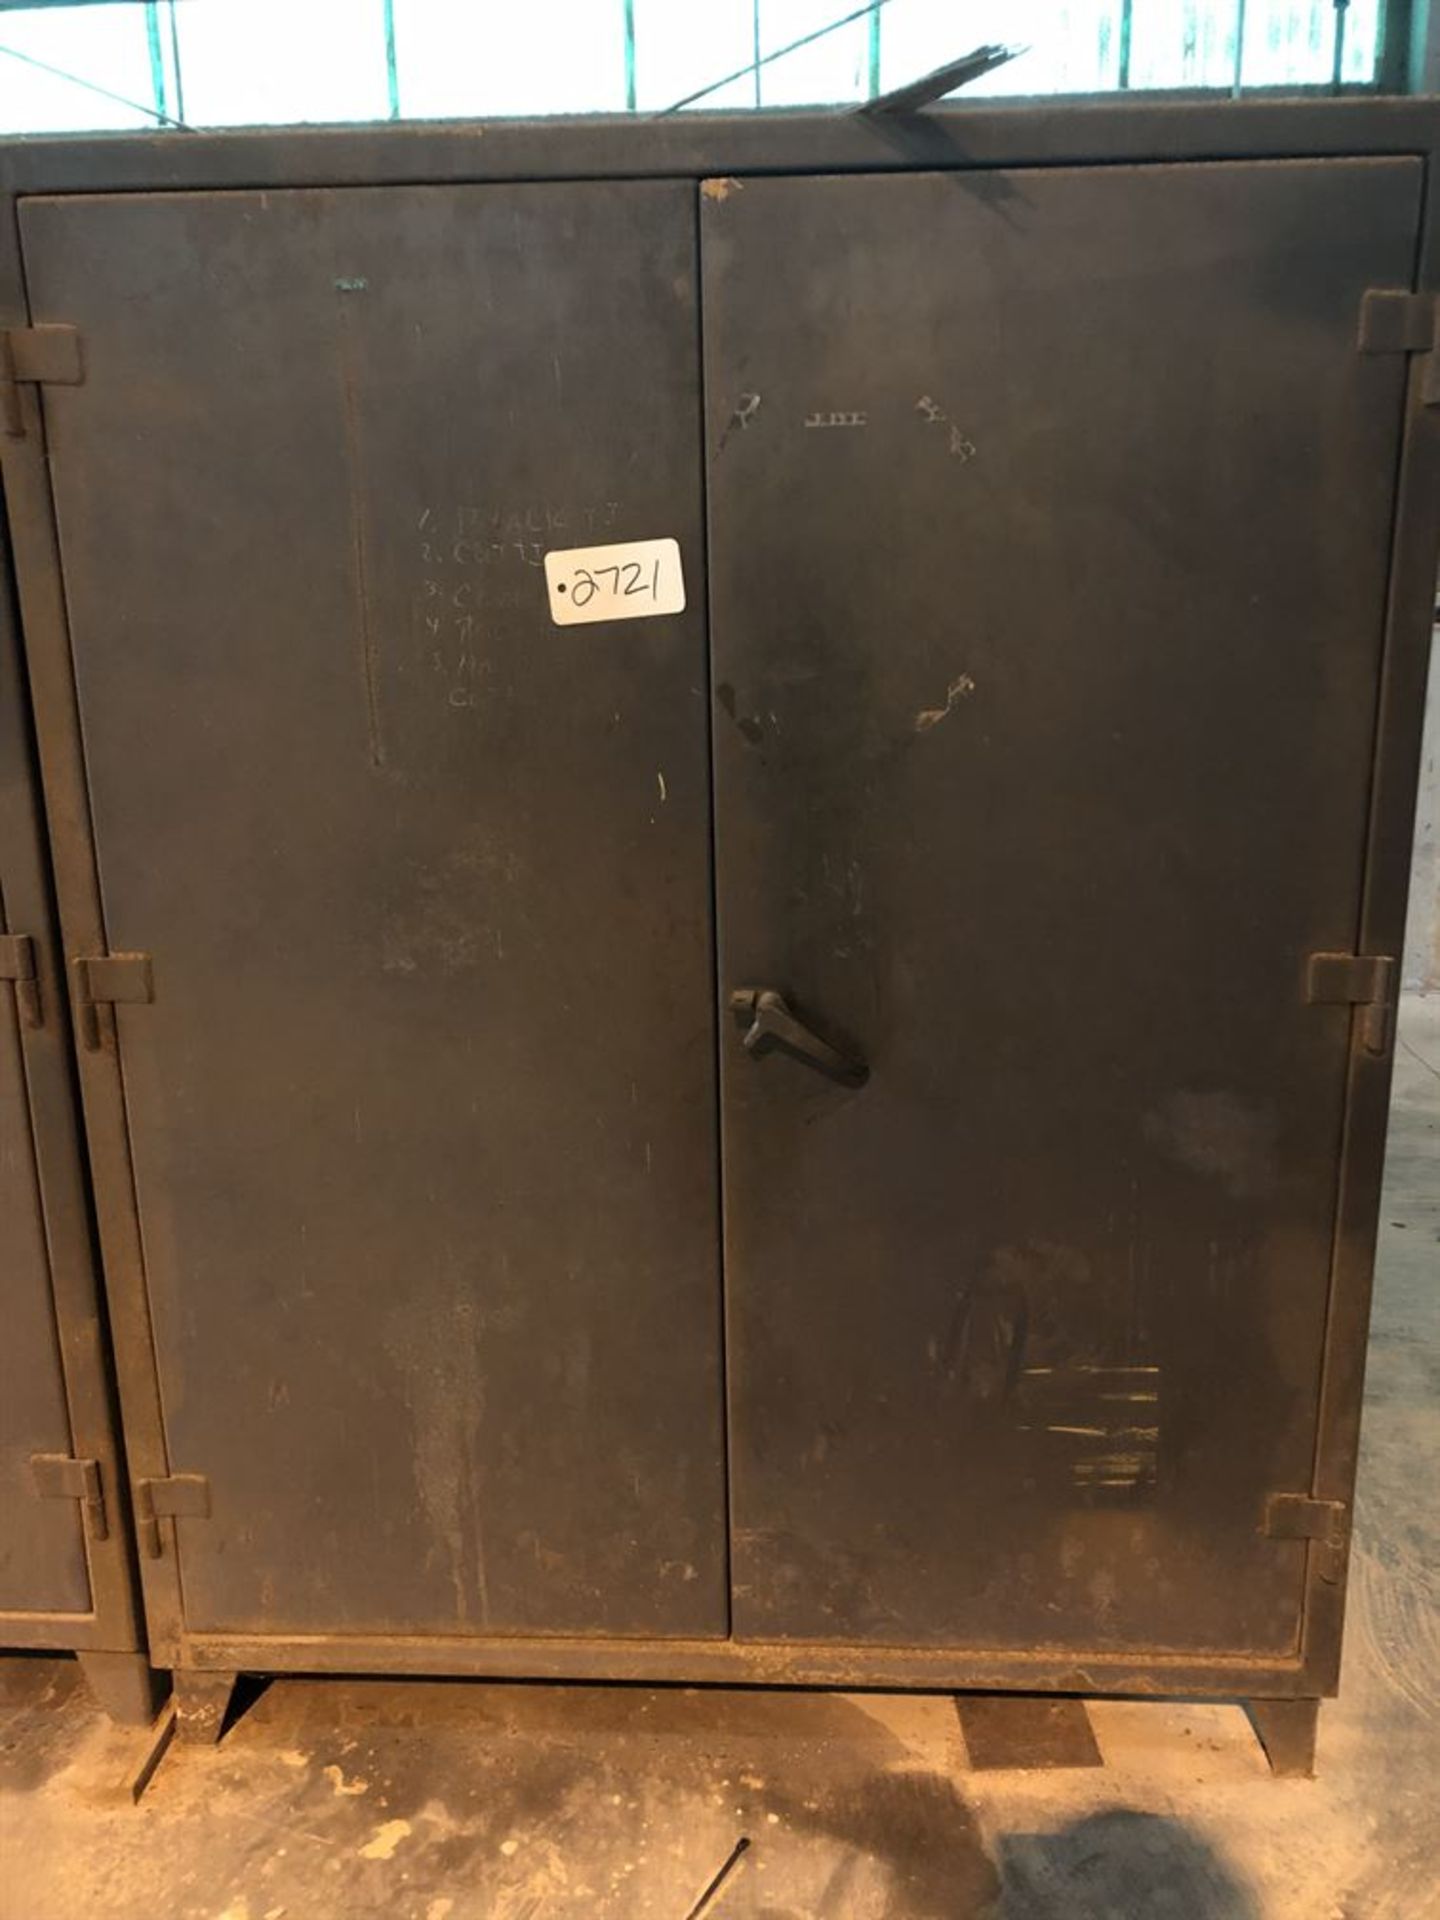 STRONG HOLD Heavy Duty Shop Cabinet, w/ Contents (Location: 55B)